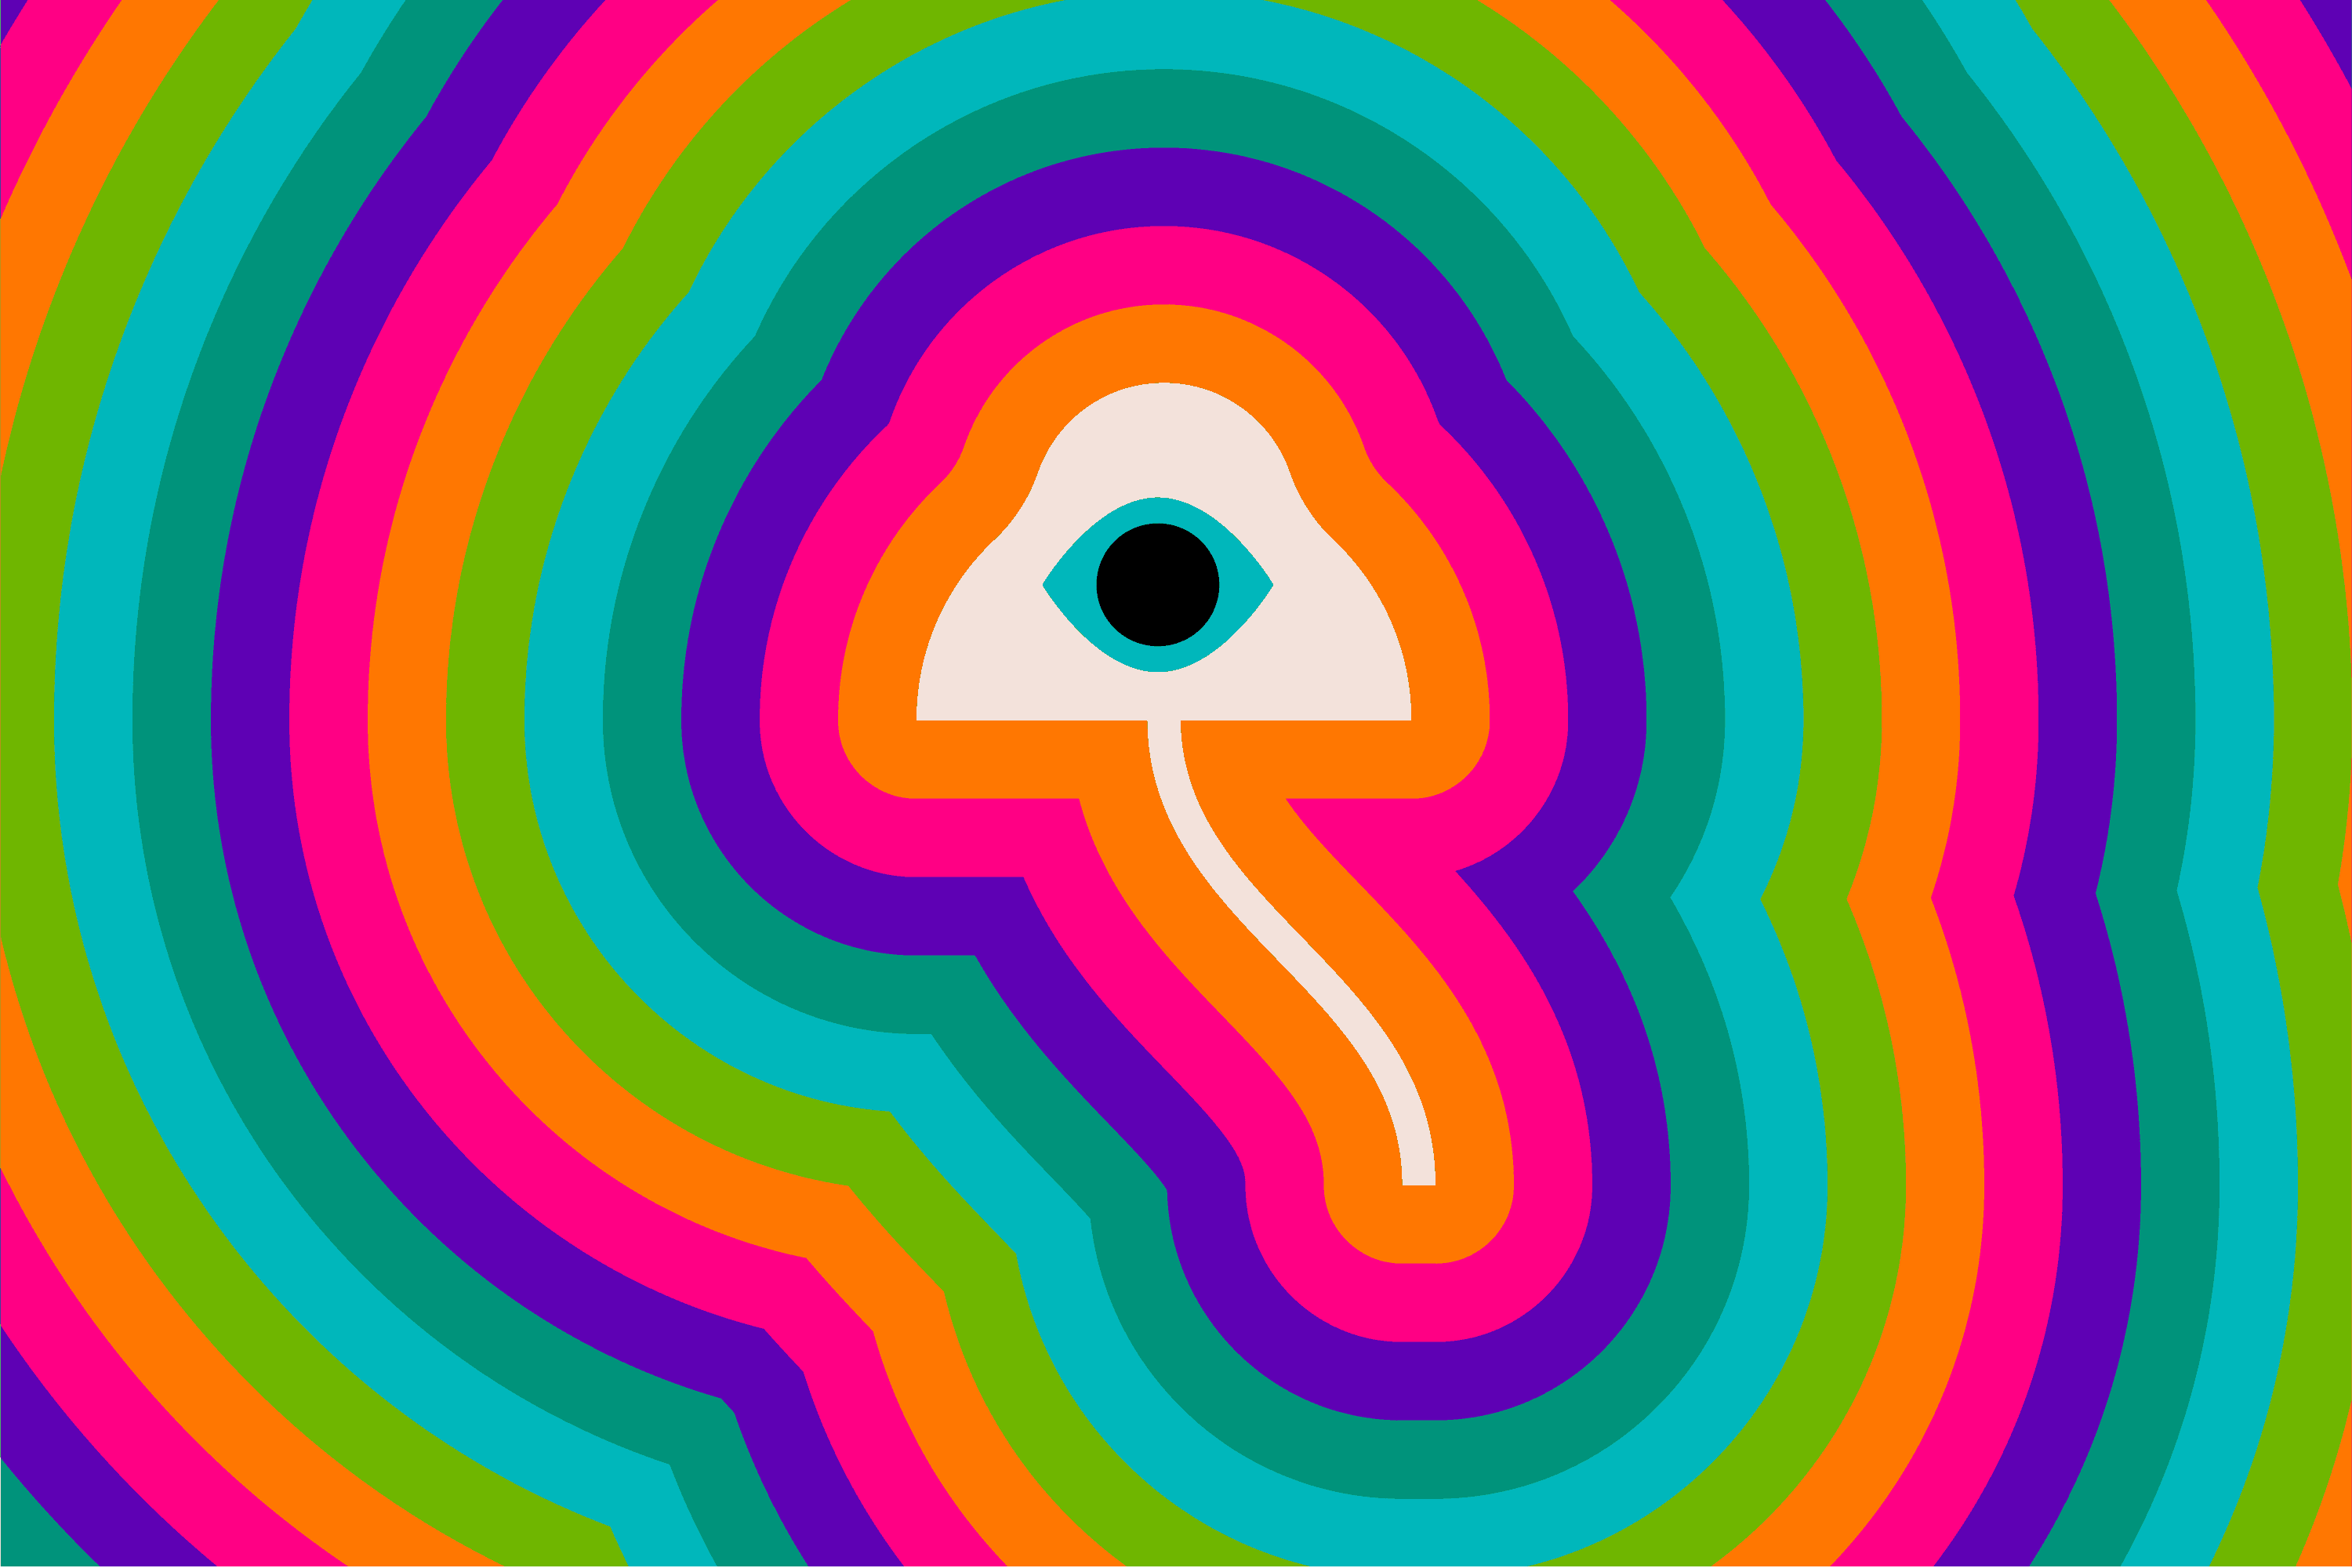 Bands of color pulse from a mushroom with a single blinking eye.